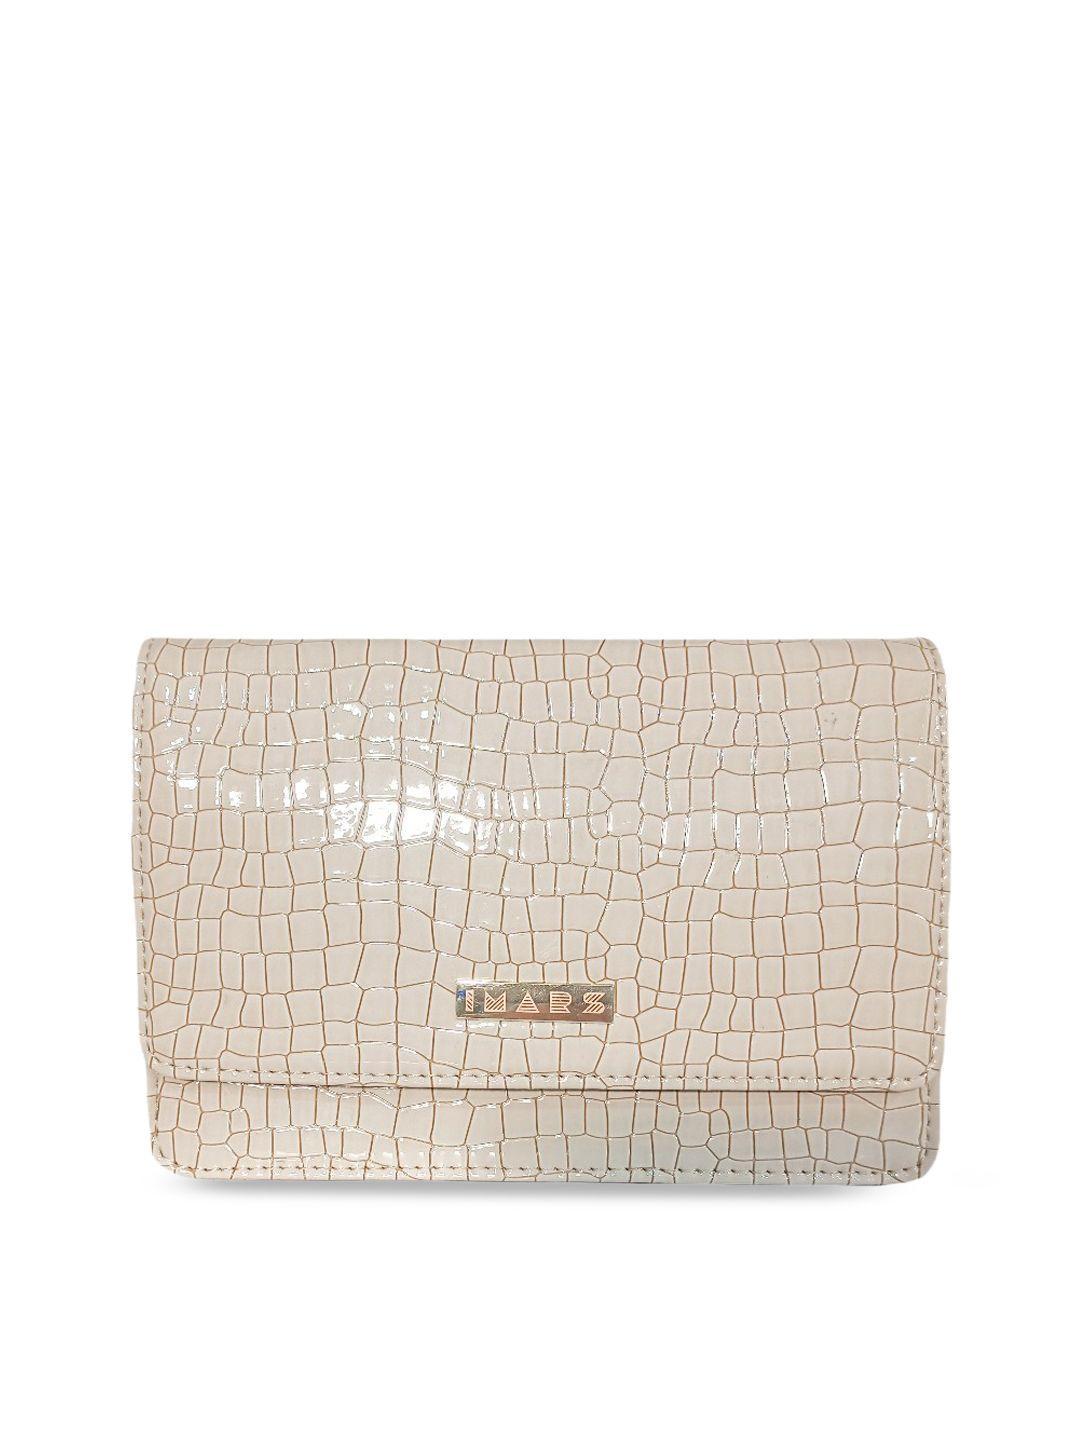 imars cream-coloured structured hobo bag with quilted